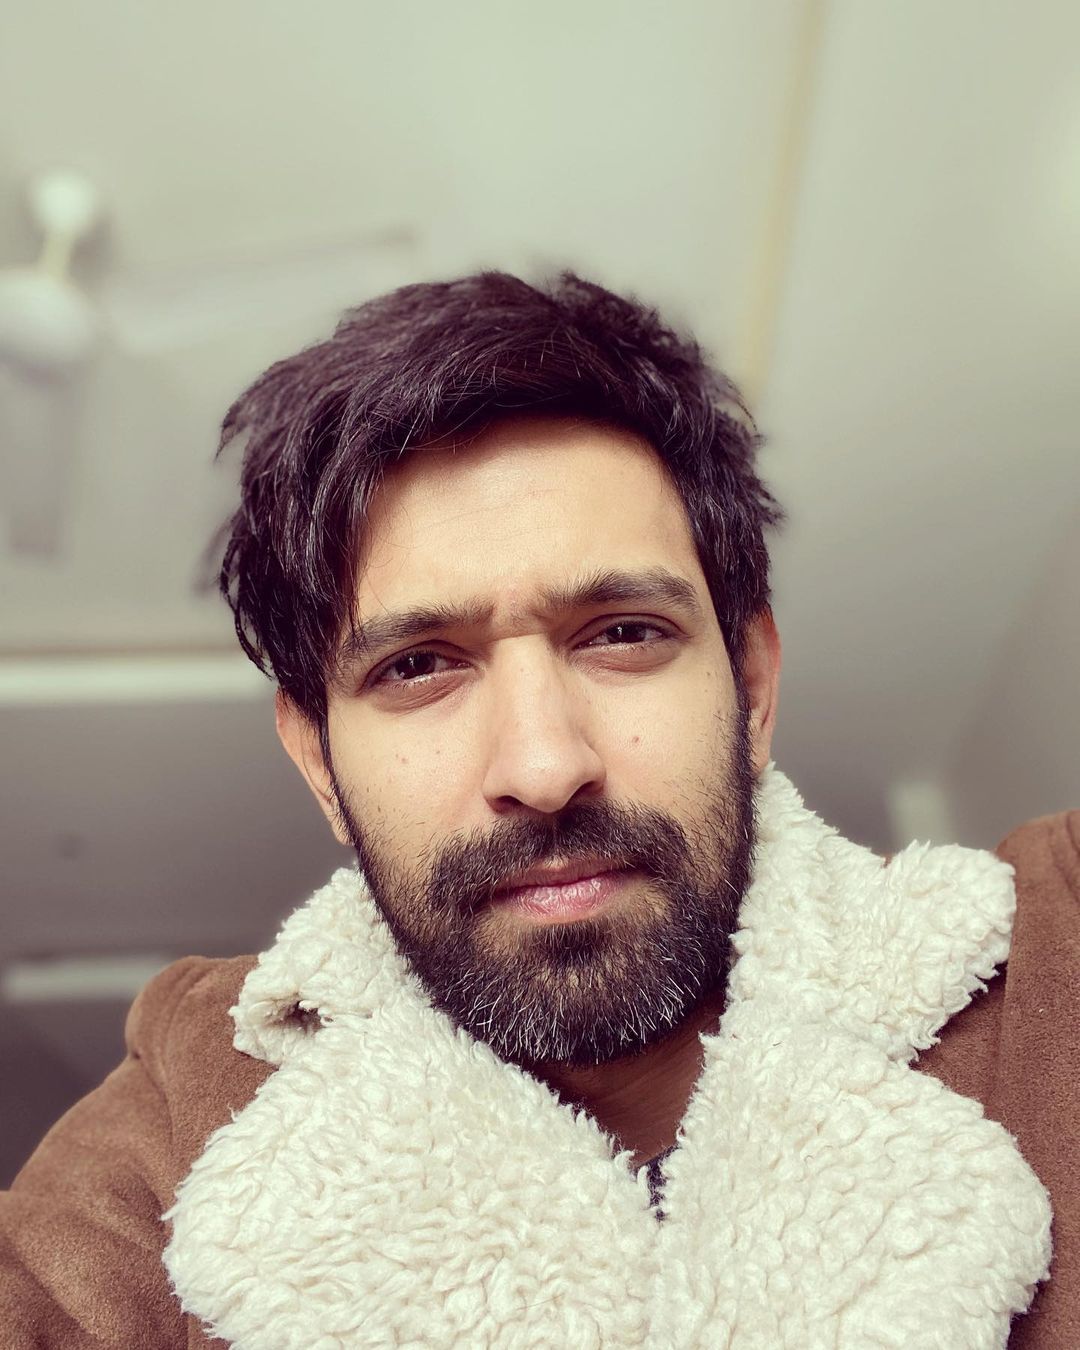 Vikrant Massey Bags The Bollywood Remake Of Malayalam Film Forensic; Actor Calls It An Out-And-Out Entertainer